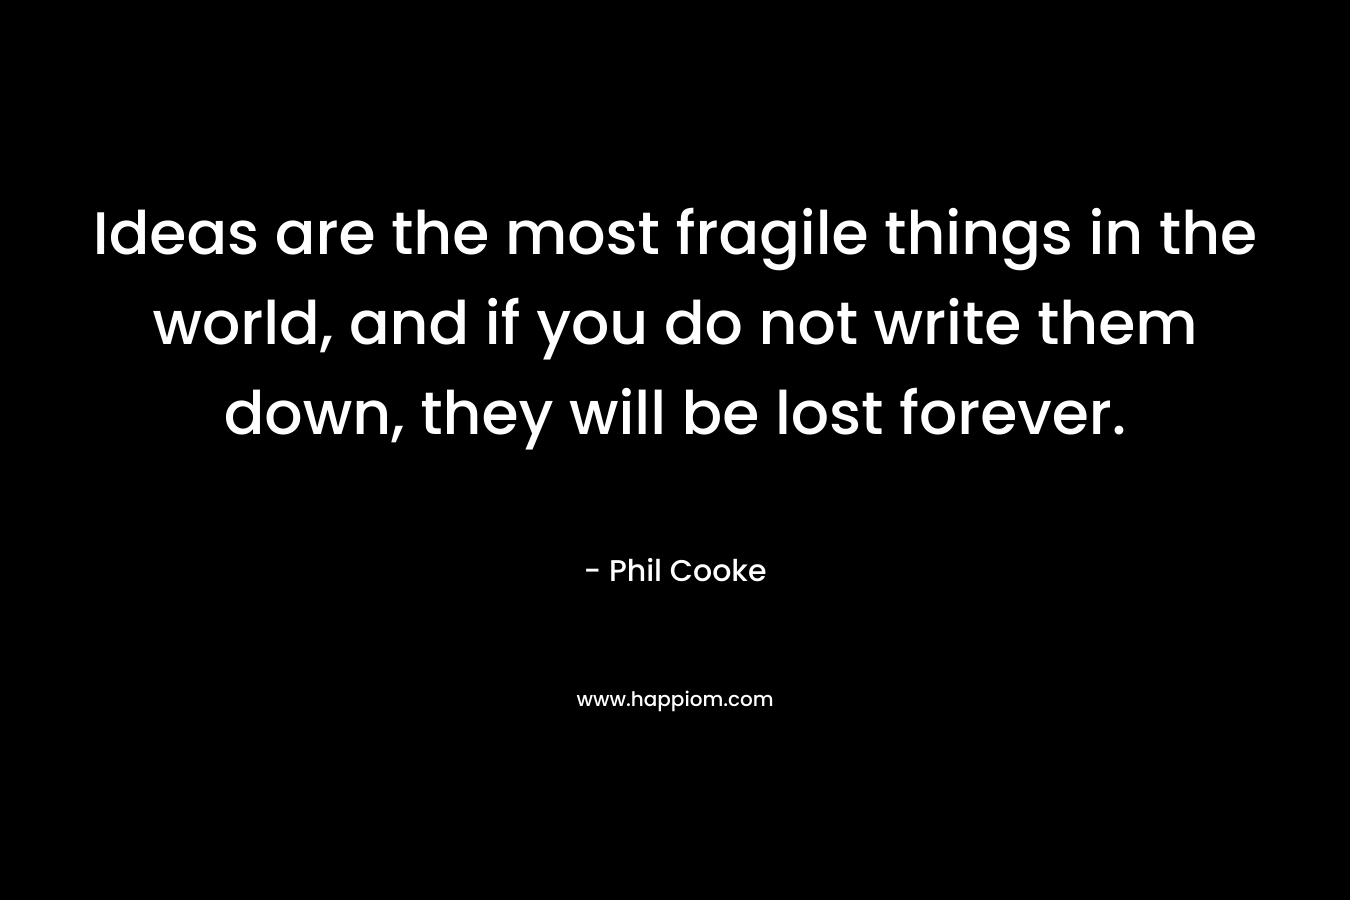 Ideas are the most fragile things in the world, and if you do not write them down, they will be lost forever.